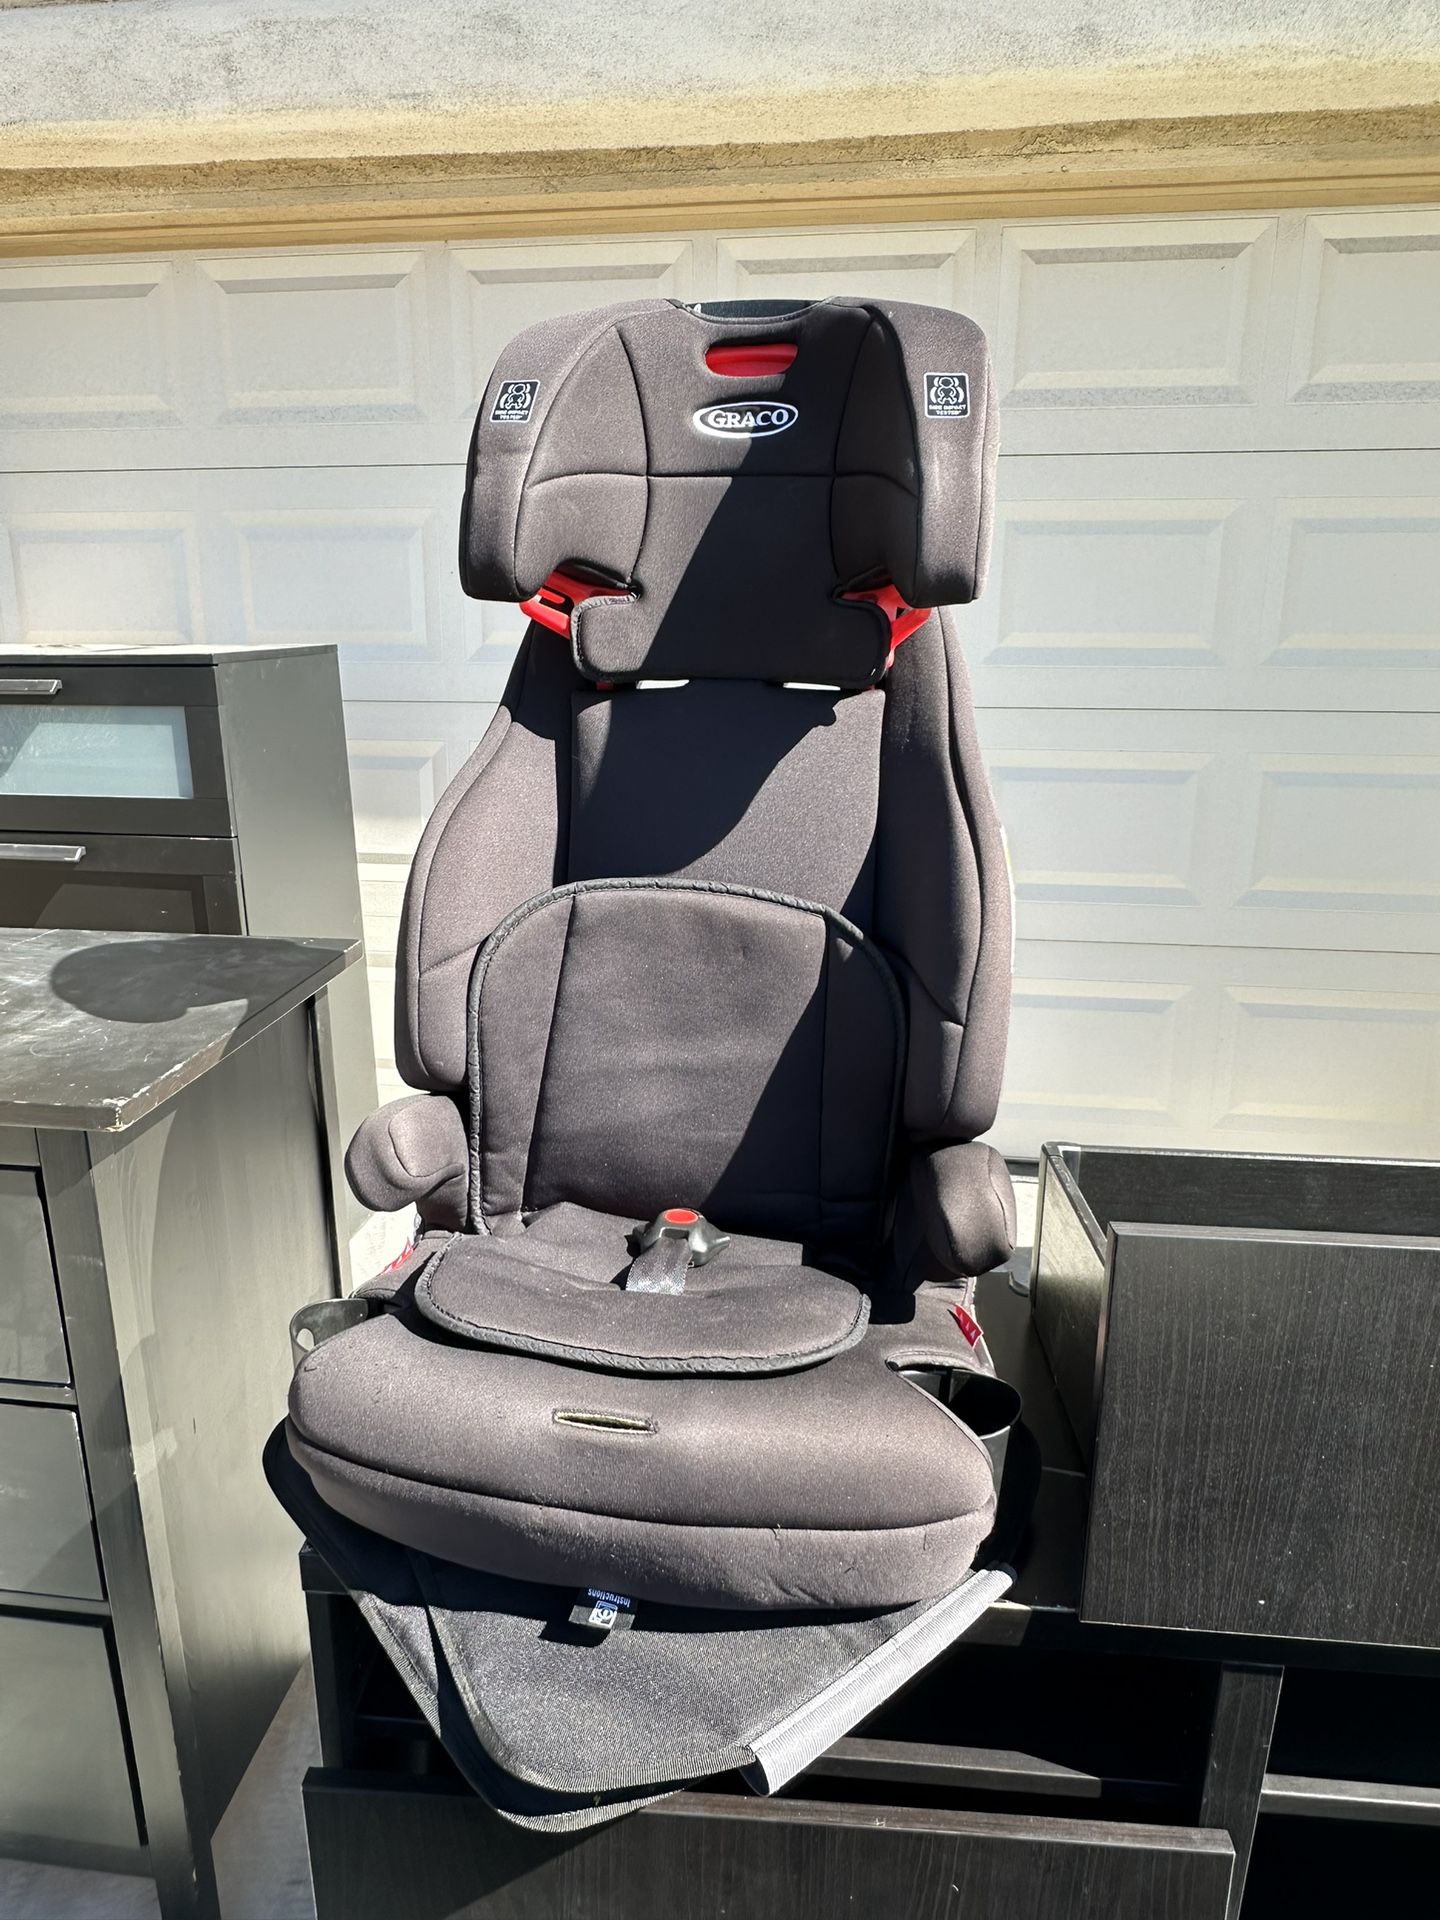 Graco 3 in 1 Booster Car Seat